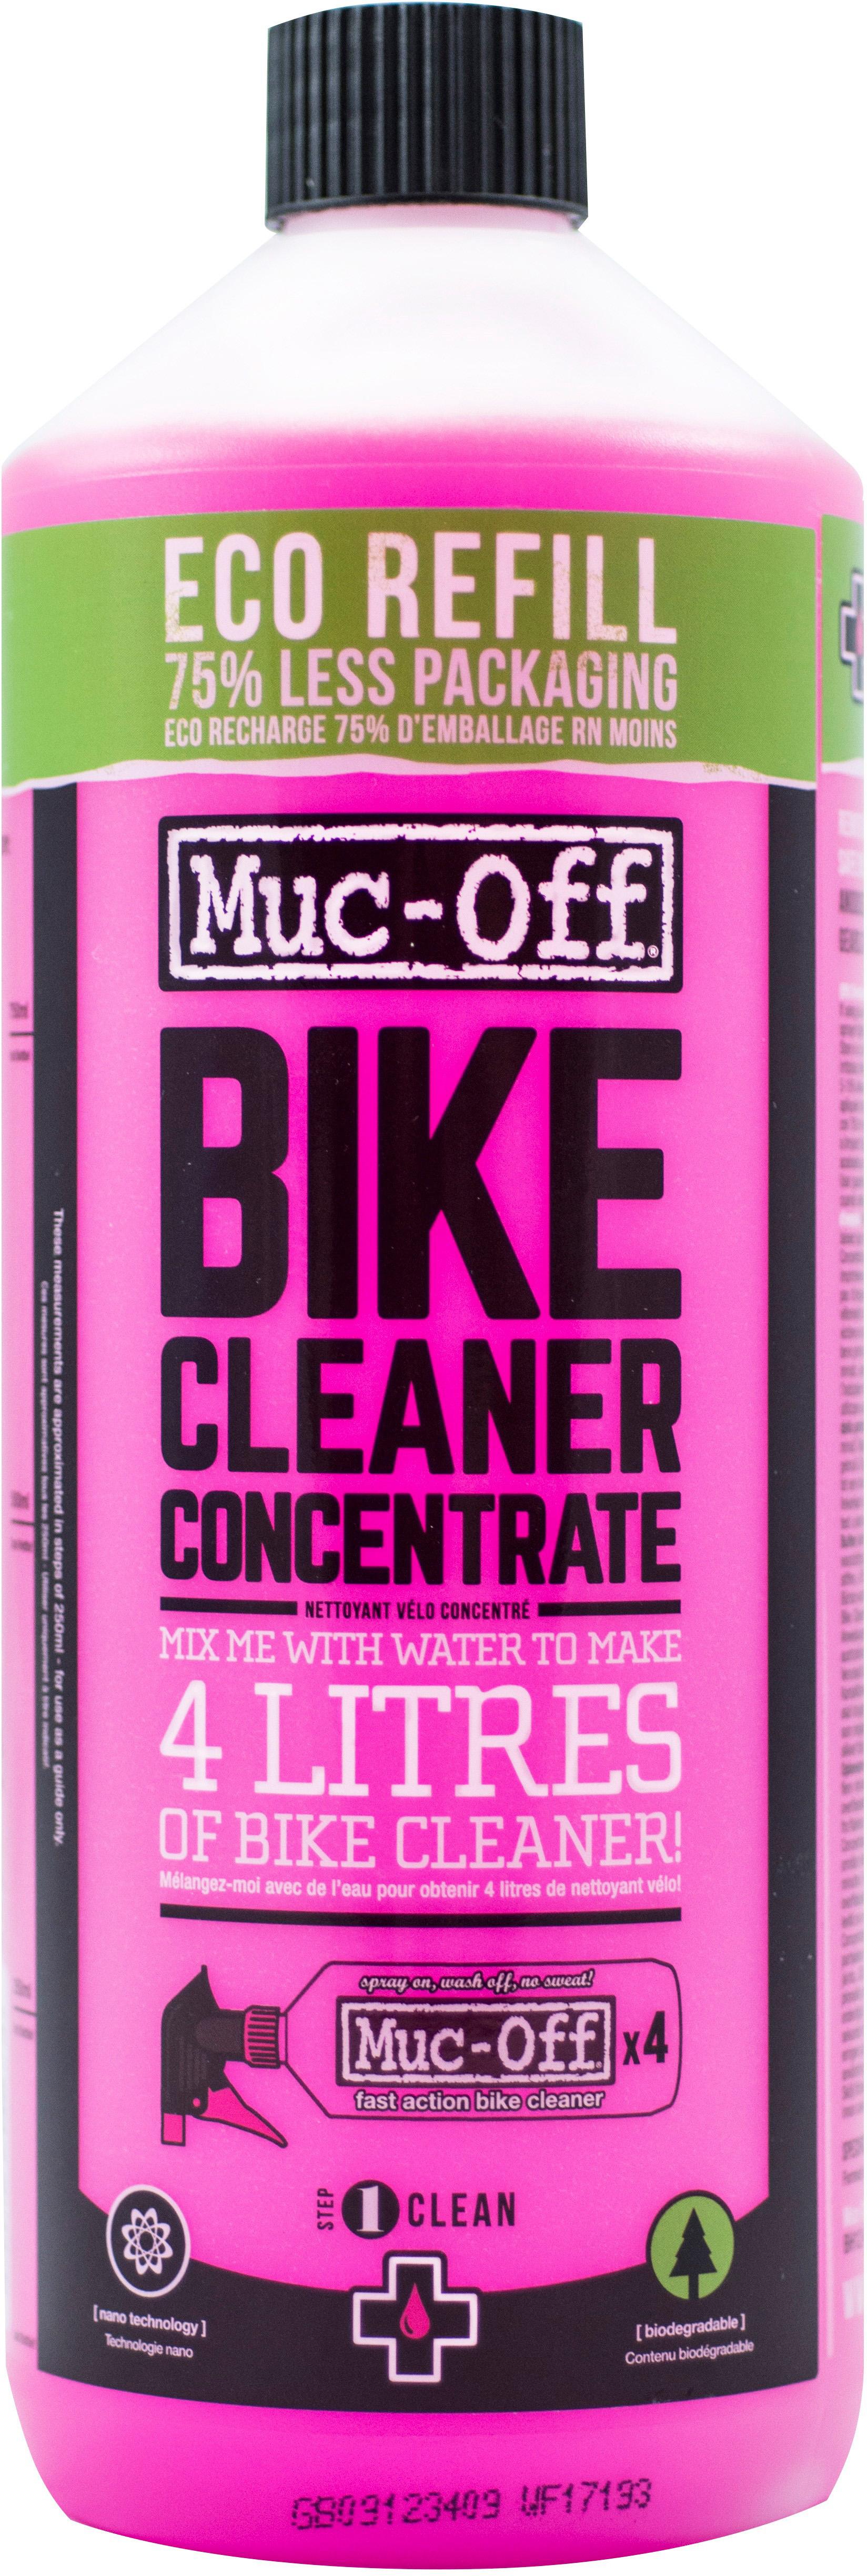 Muc-off Bike Cleaner Concentrate (1 Litre) - Pink